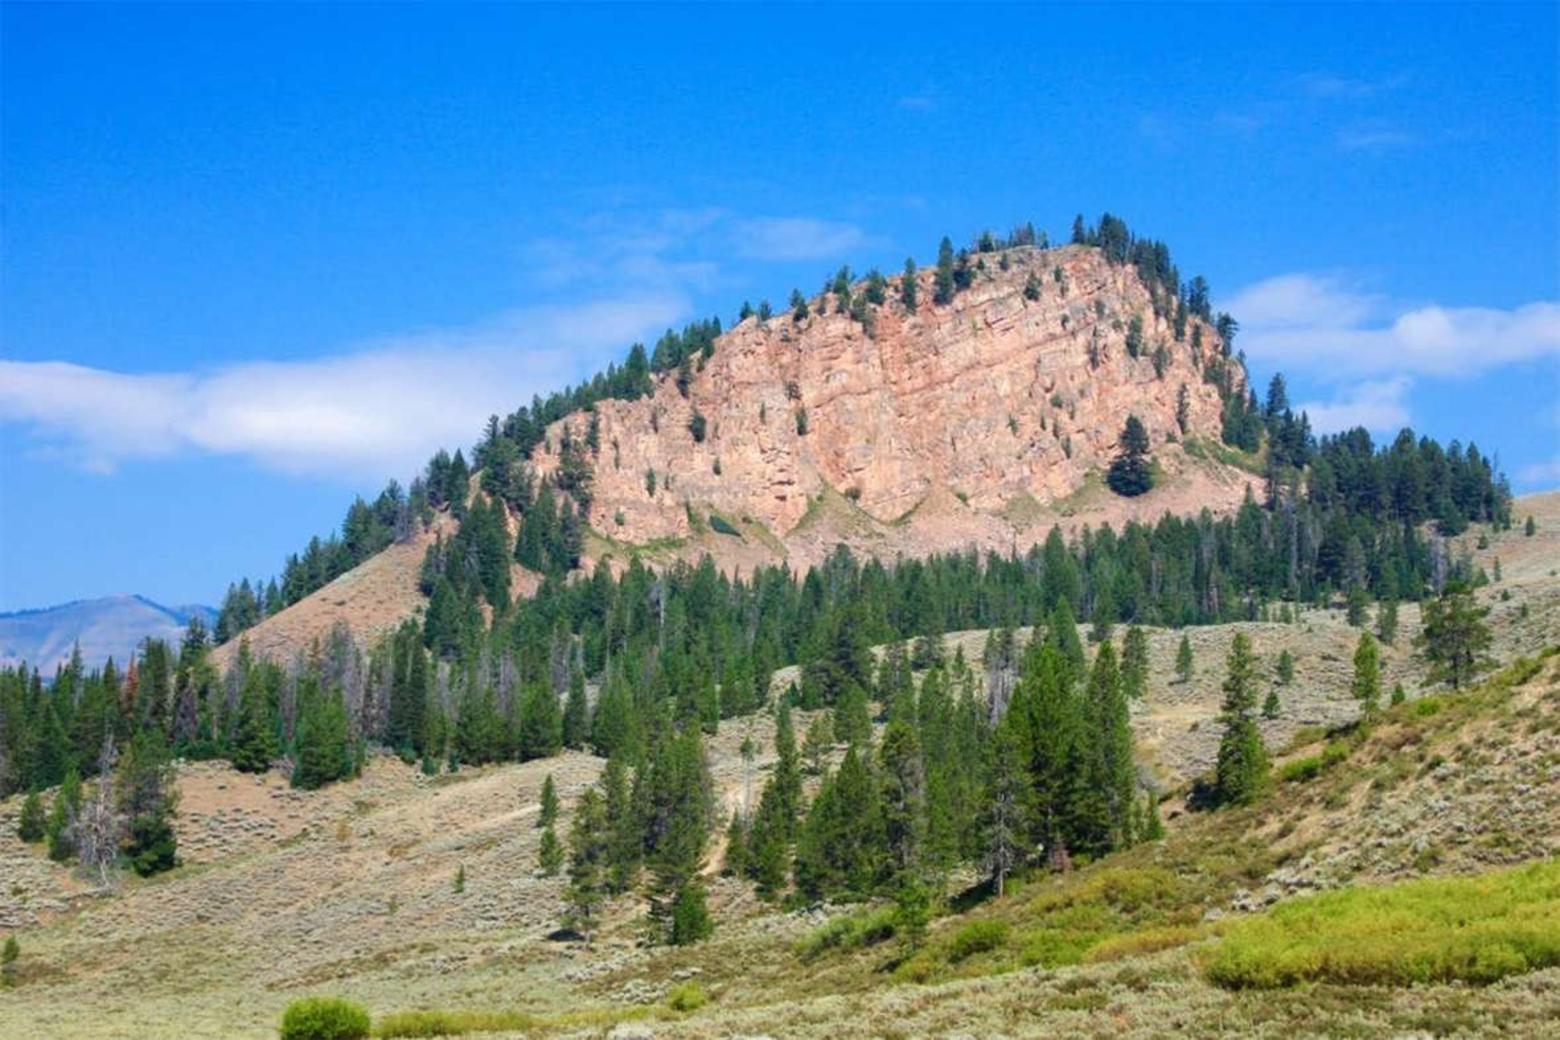 Battle Mountain, misnamed for the nearby confrontation between the Bannock party and the posse, as it looks today. Image courtesy Summitpost.org